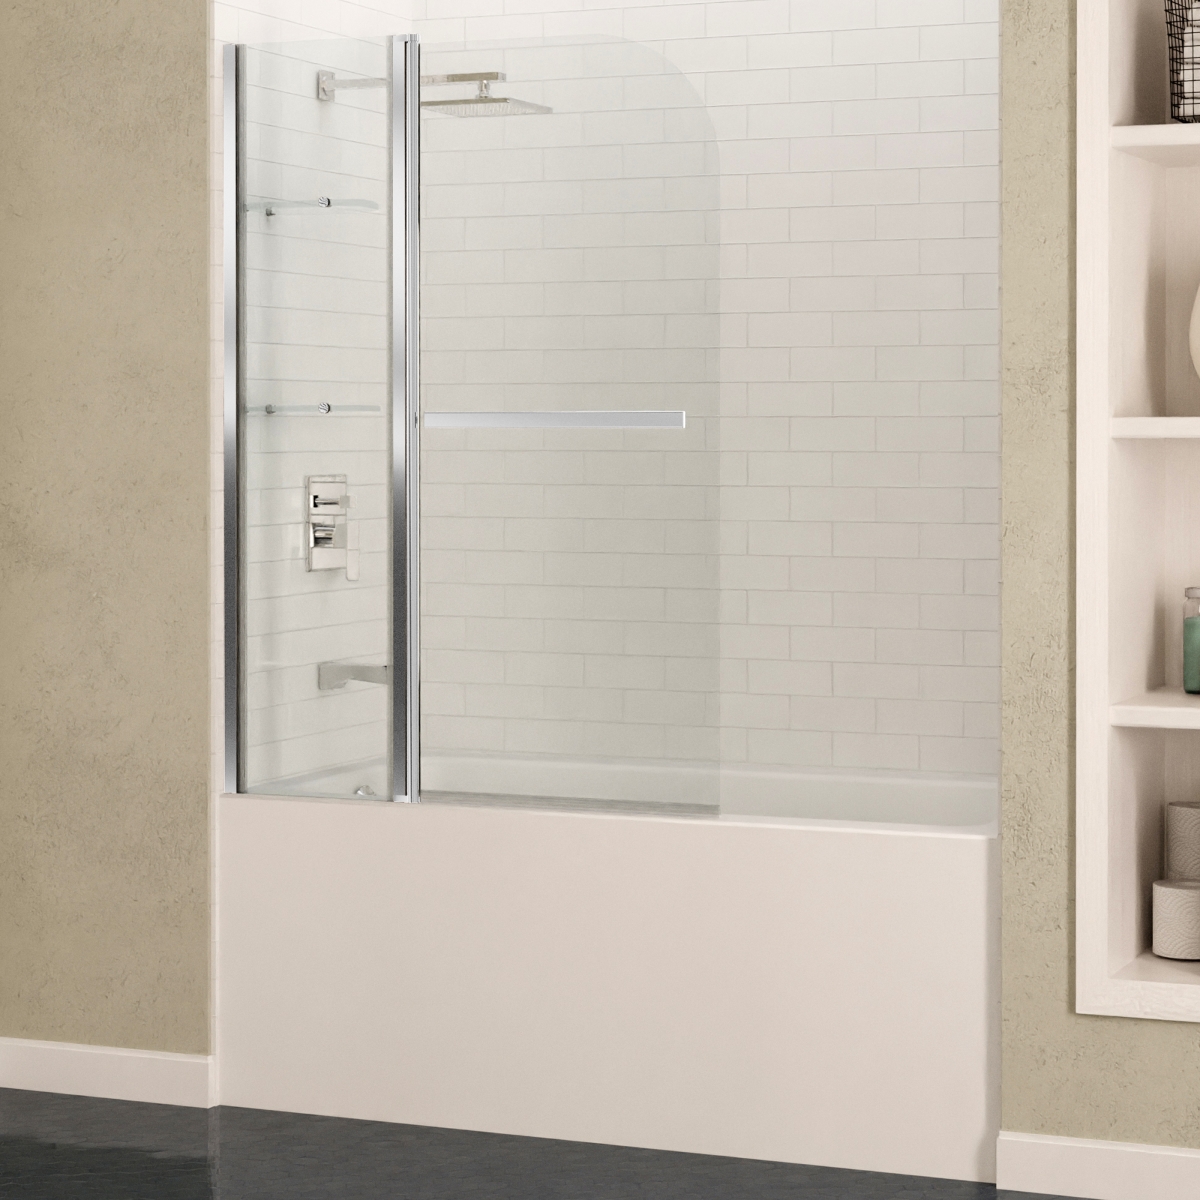 Picture of Anzzi SD-AZ054-01CH 48 x 58 in. Galleon Series Frameless Tub Door with Tsunami Guard, Polished Chrome